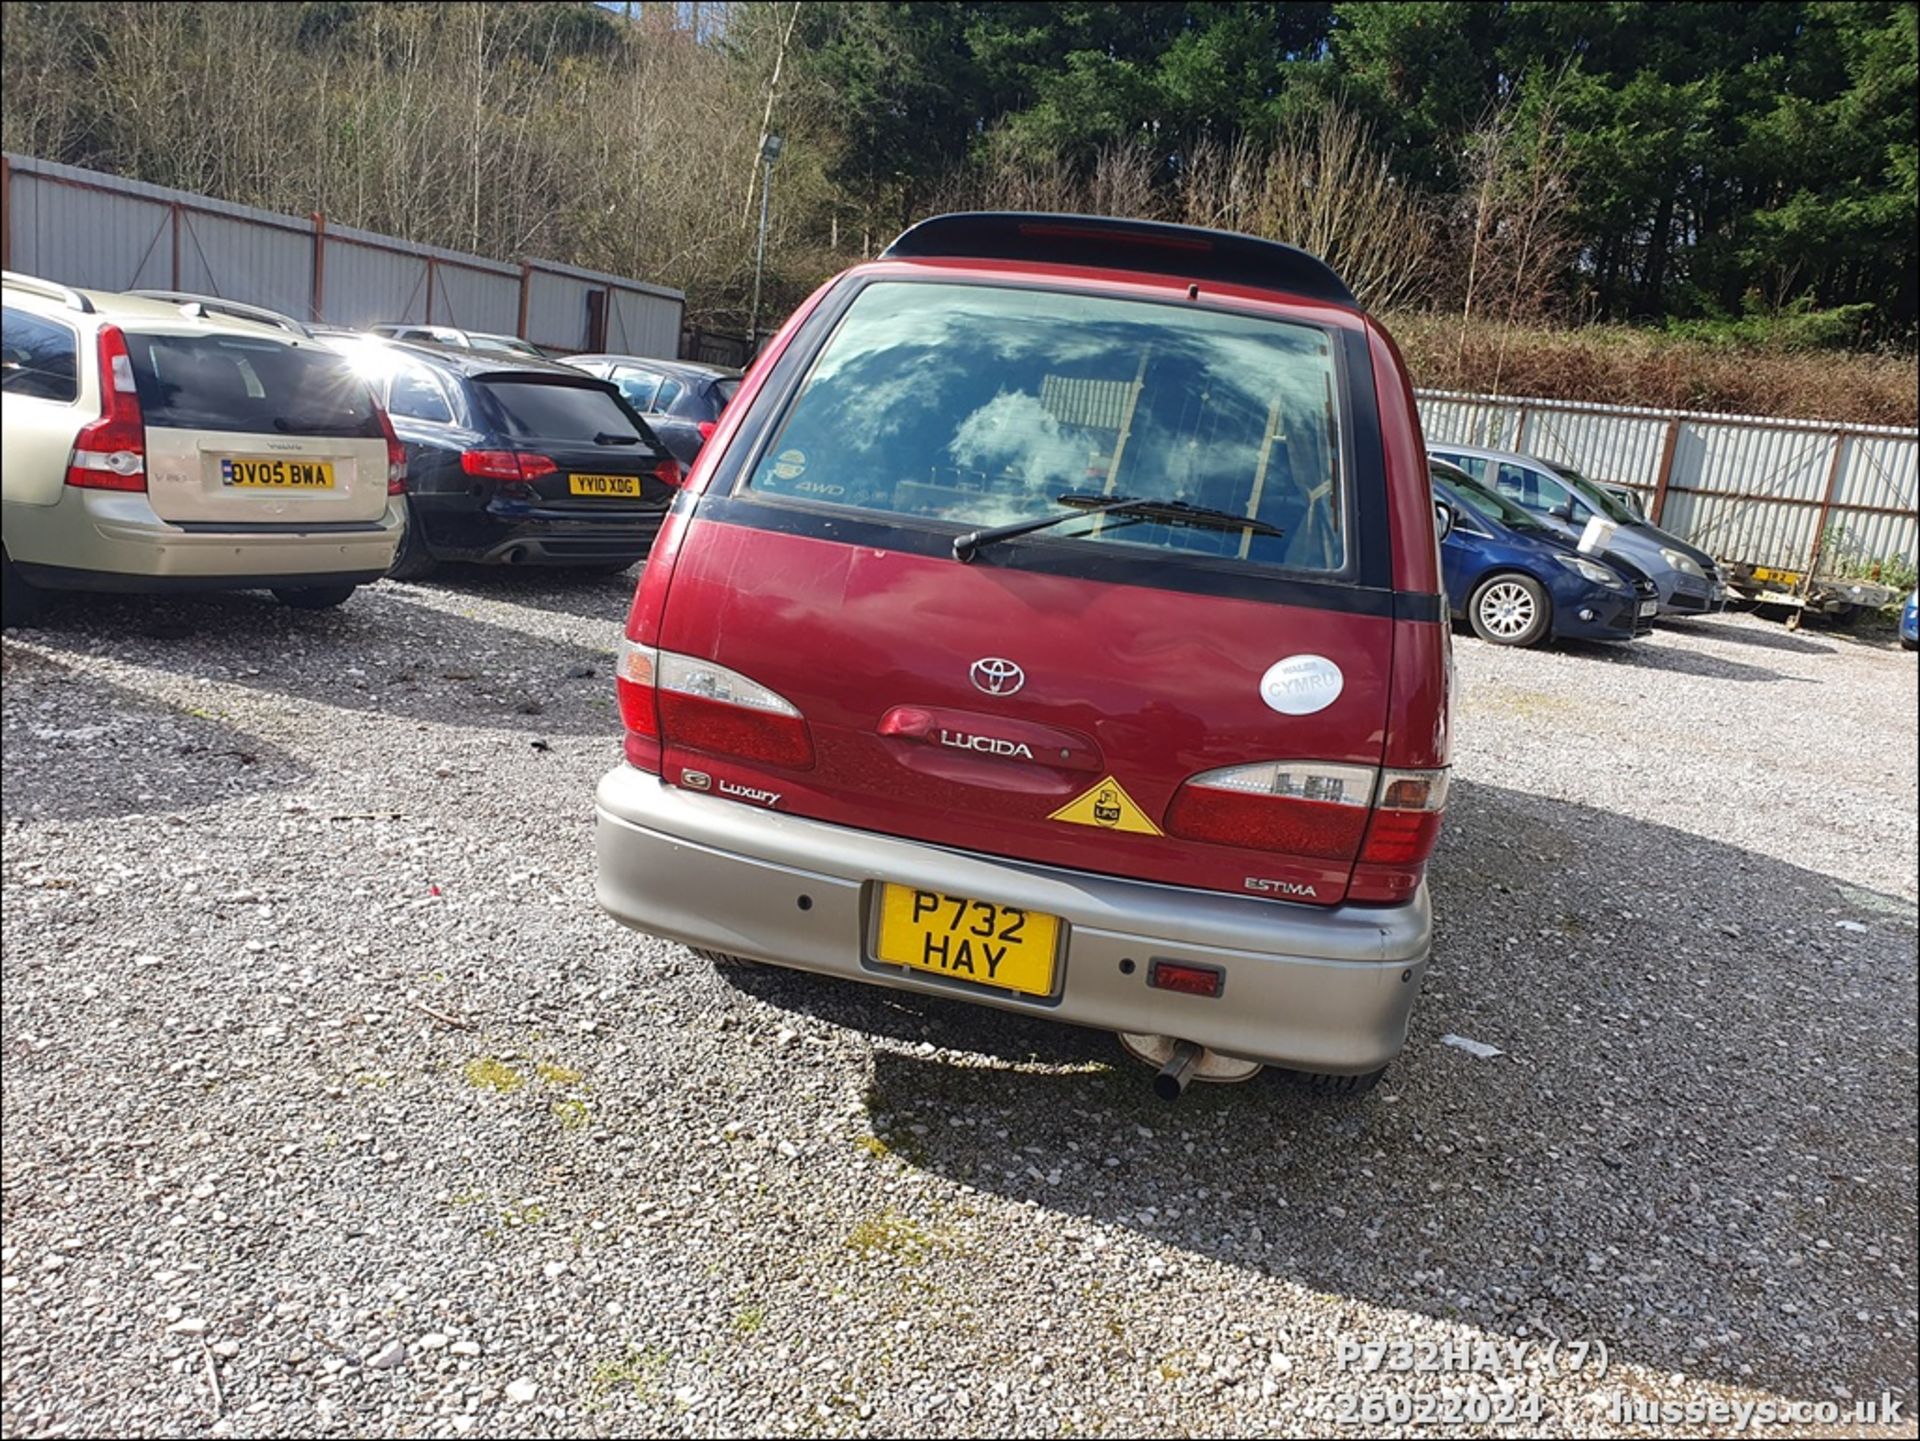 1997 TOYOTA LUCIDA - 2184cc 4dr Van (Red) - Image 8 of 22